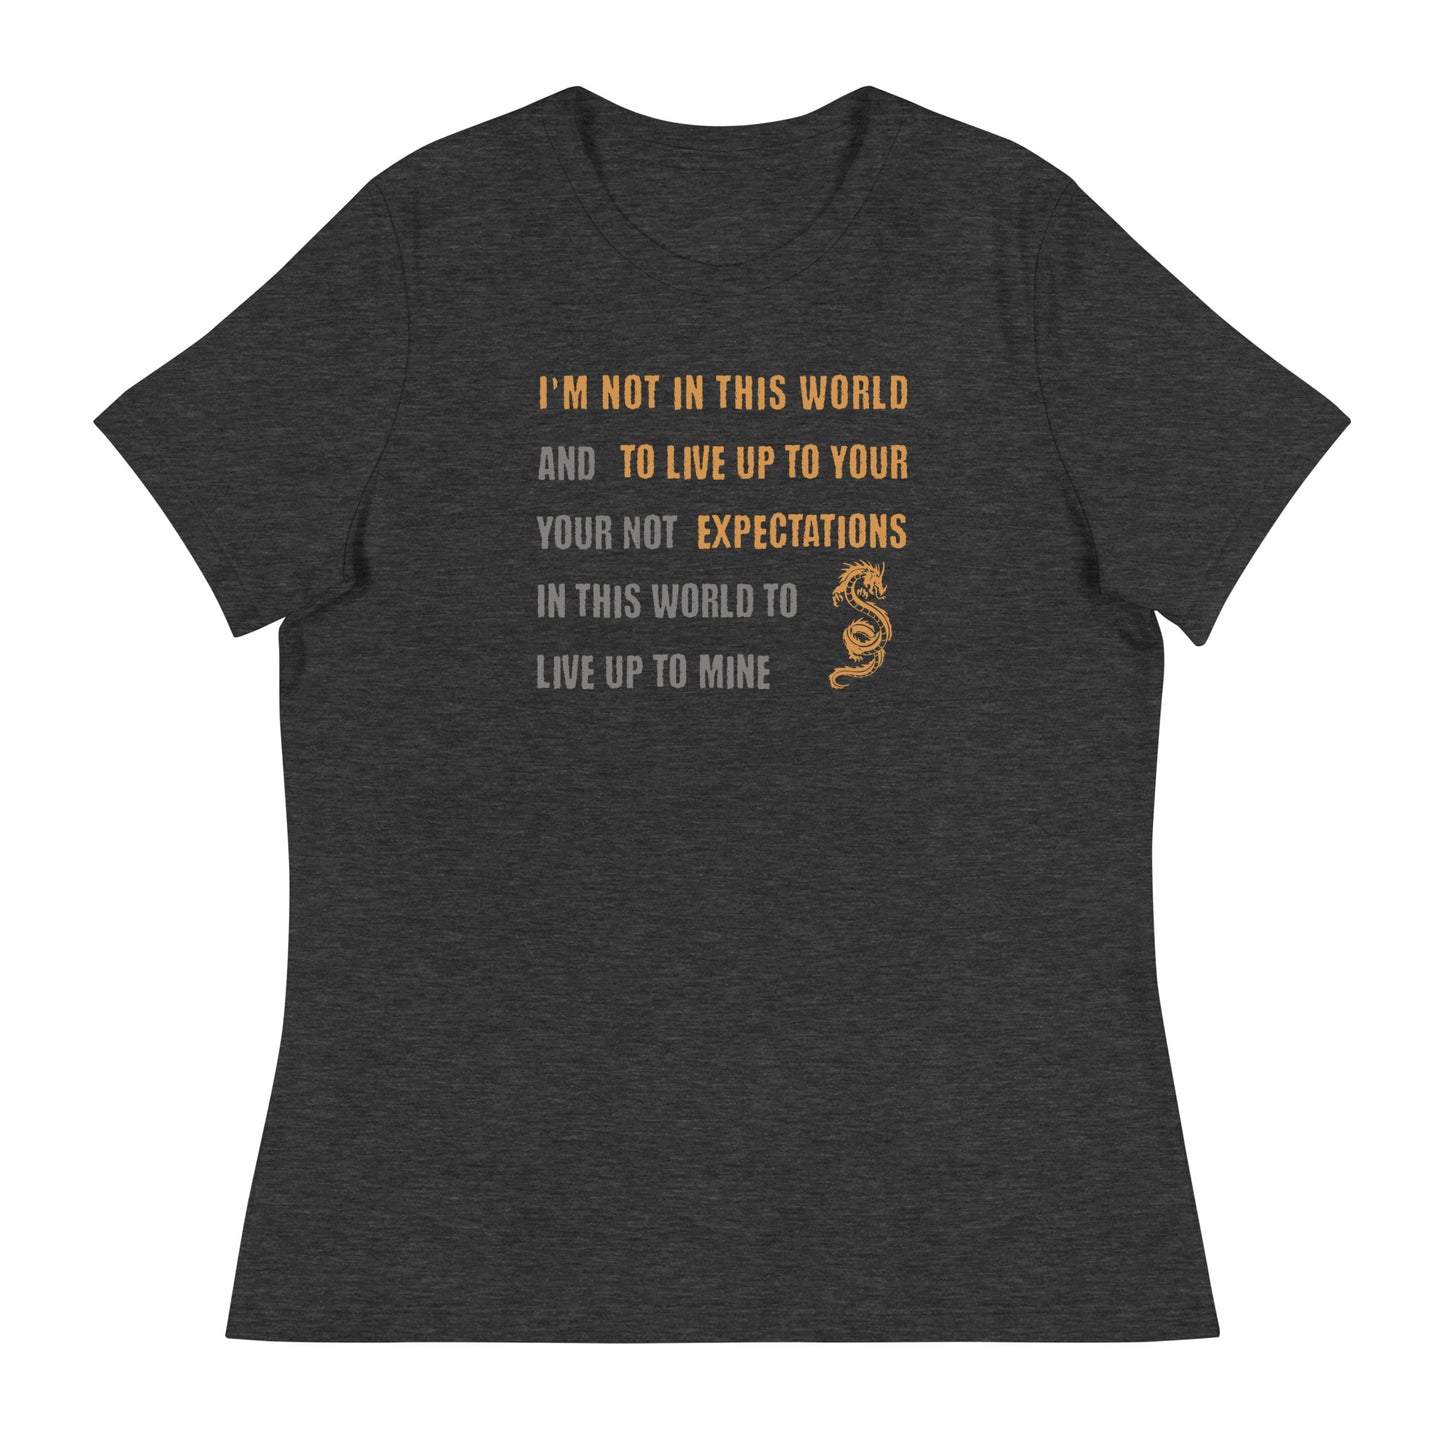 I'm Not Here To Live Up To Your Expectations Women's T-Shirt Dark Grey Heather